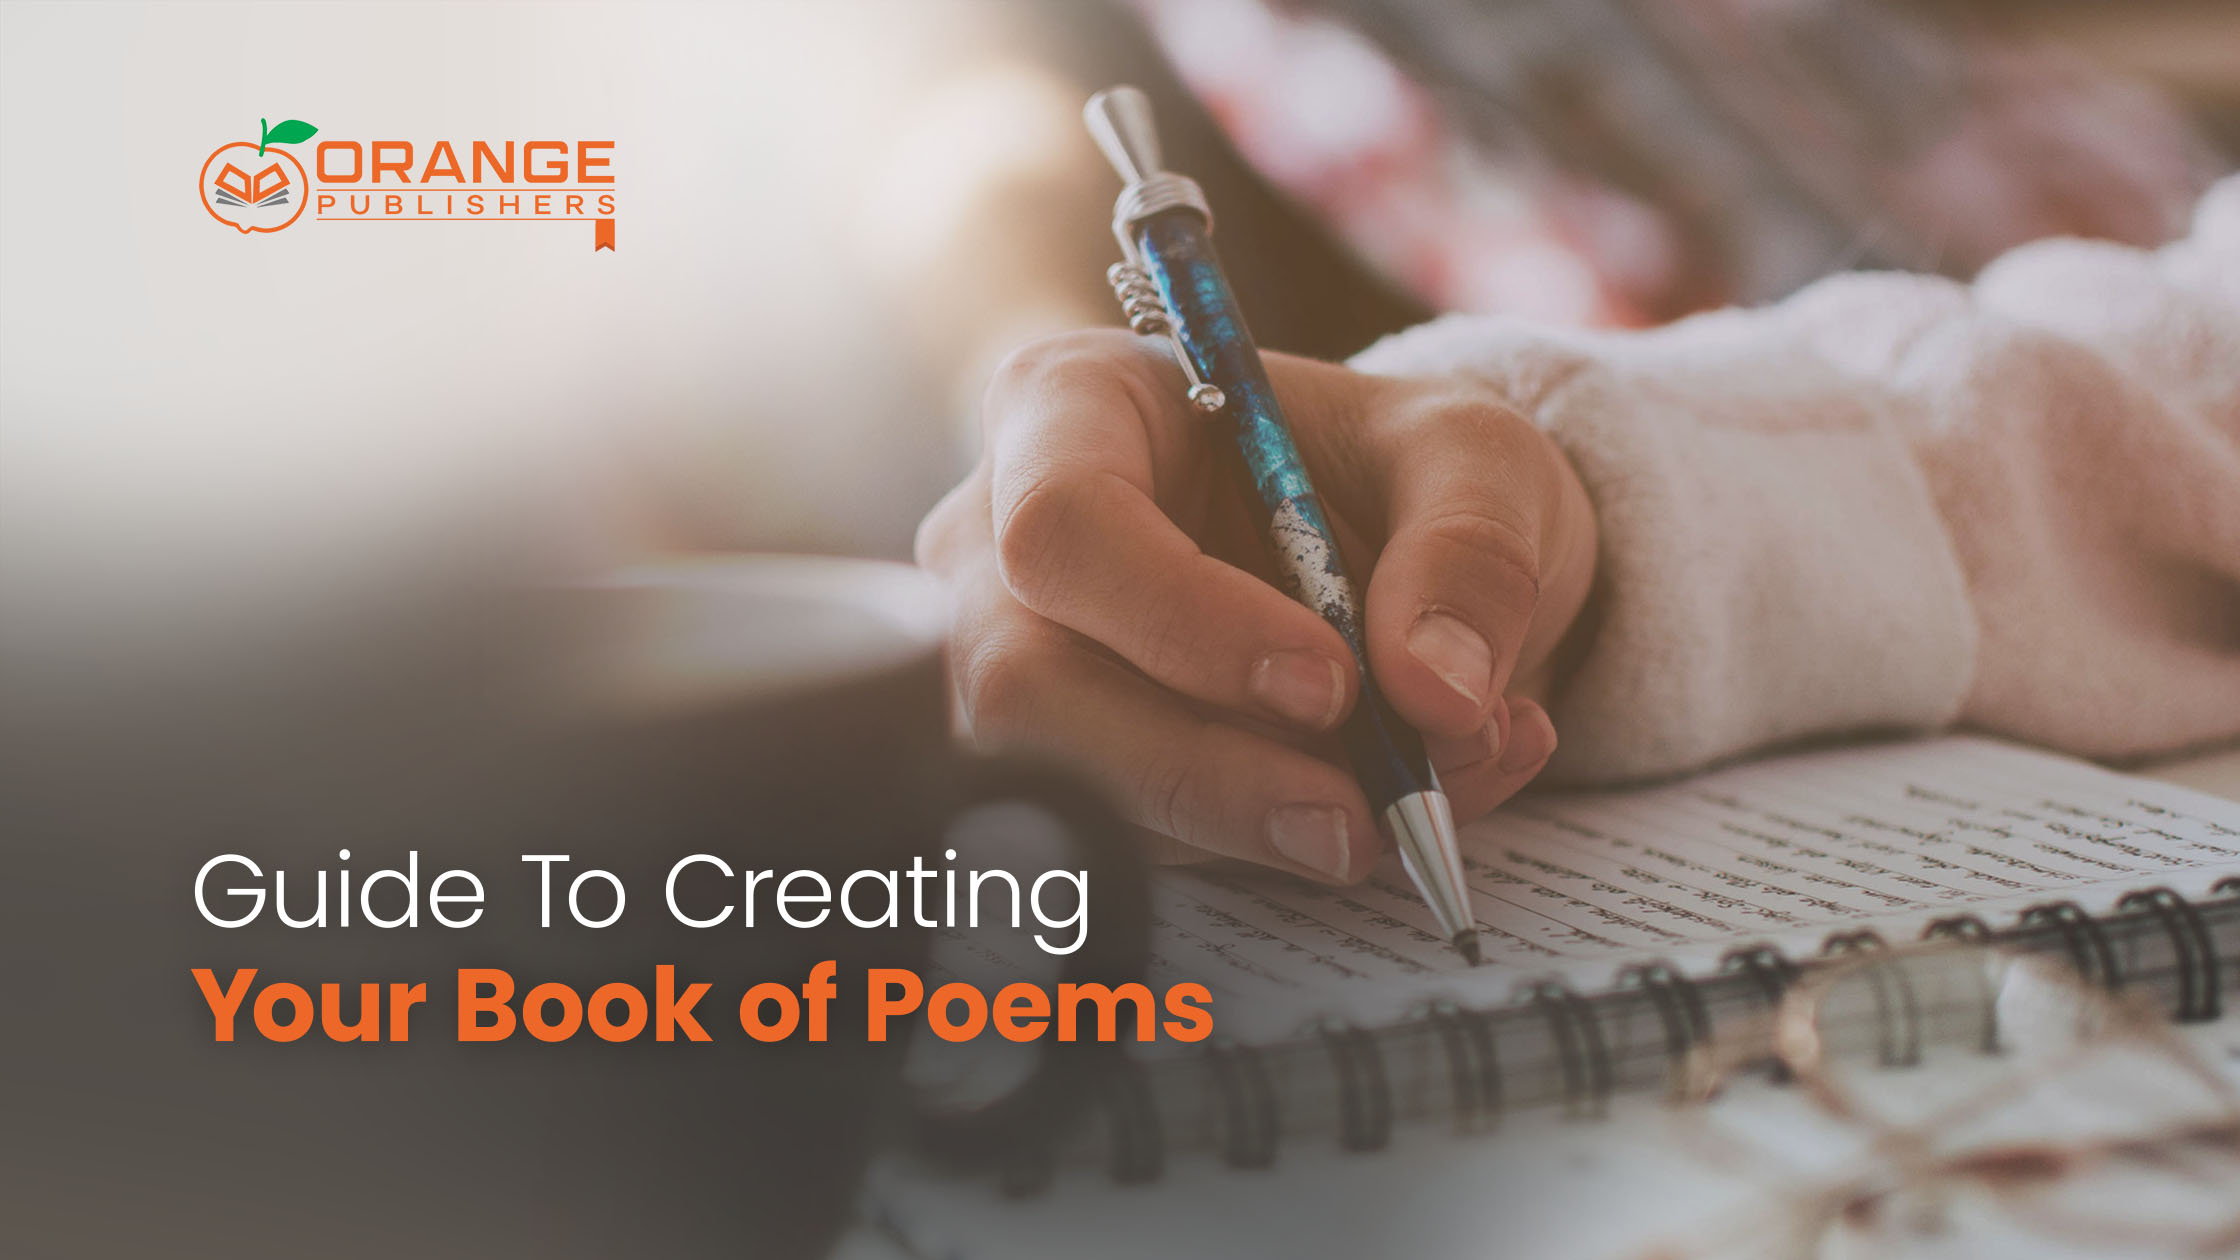 Guide To Creating Your Book of Poems: Publish and Markets